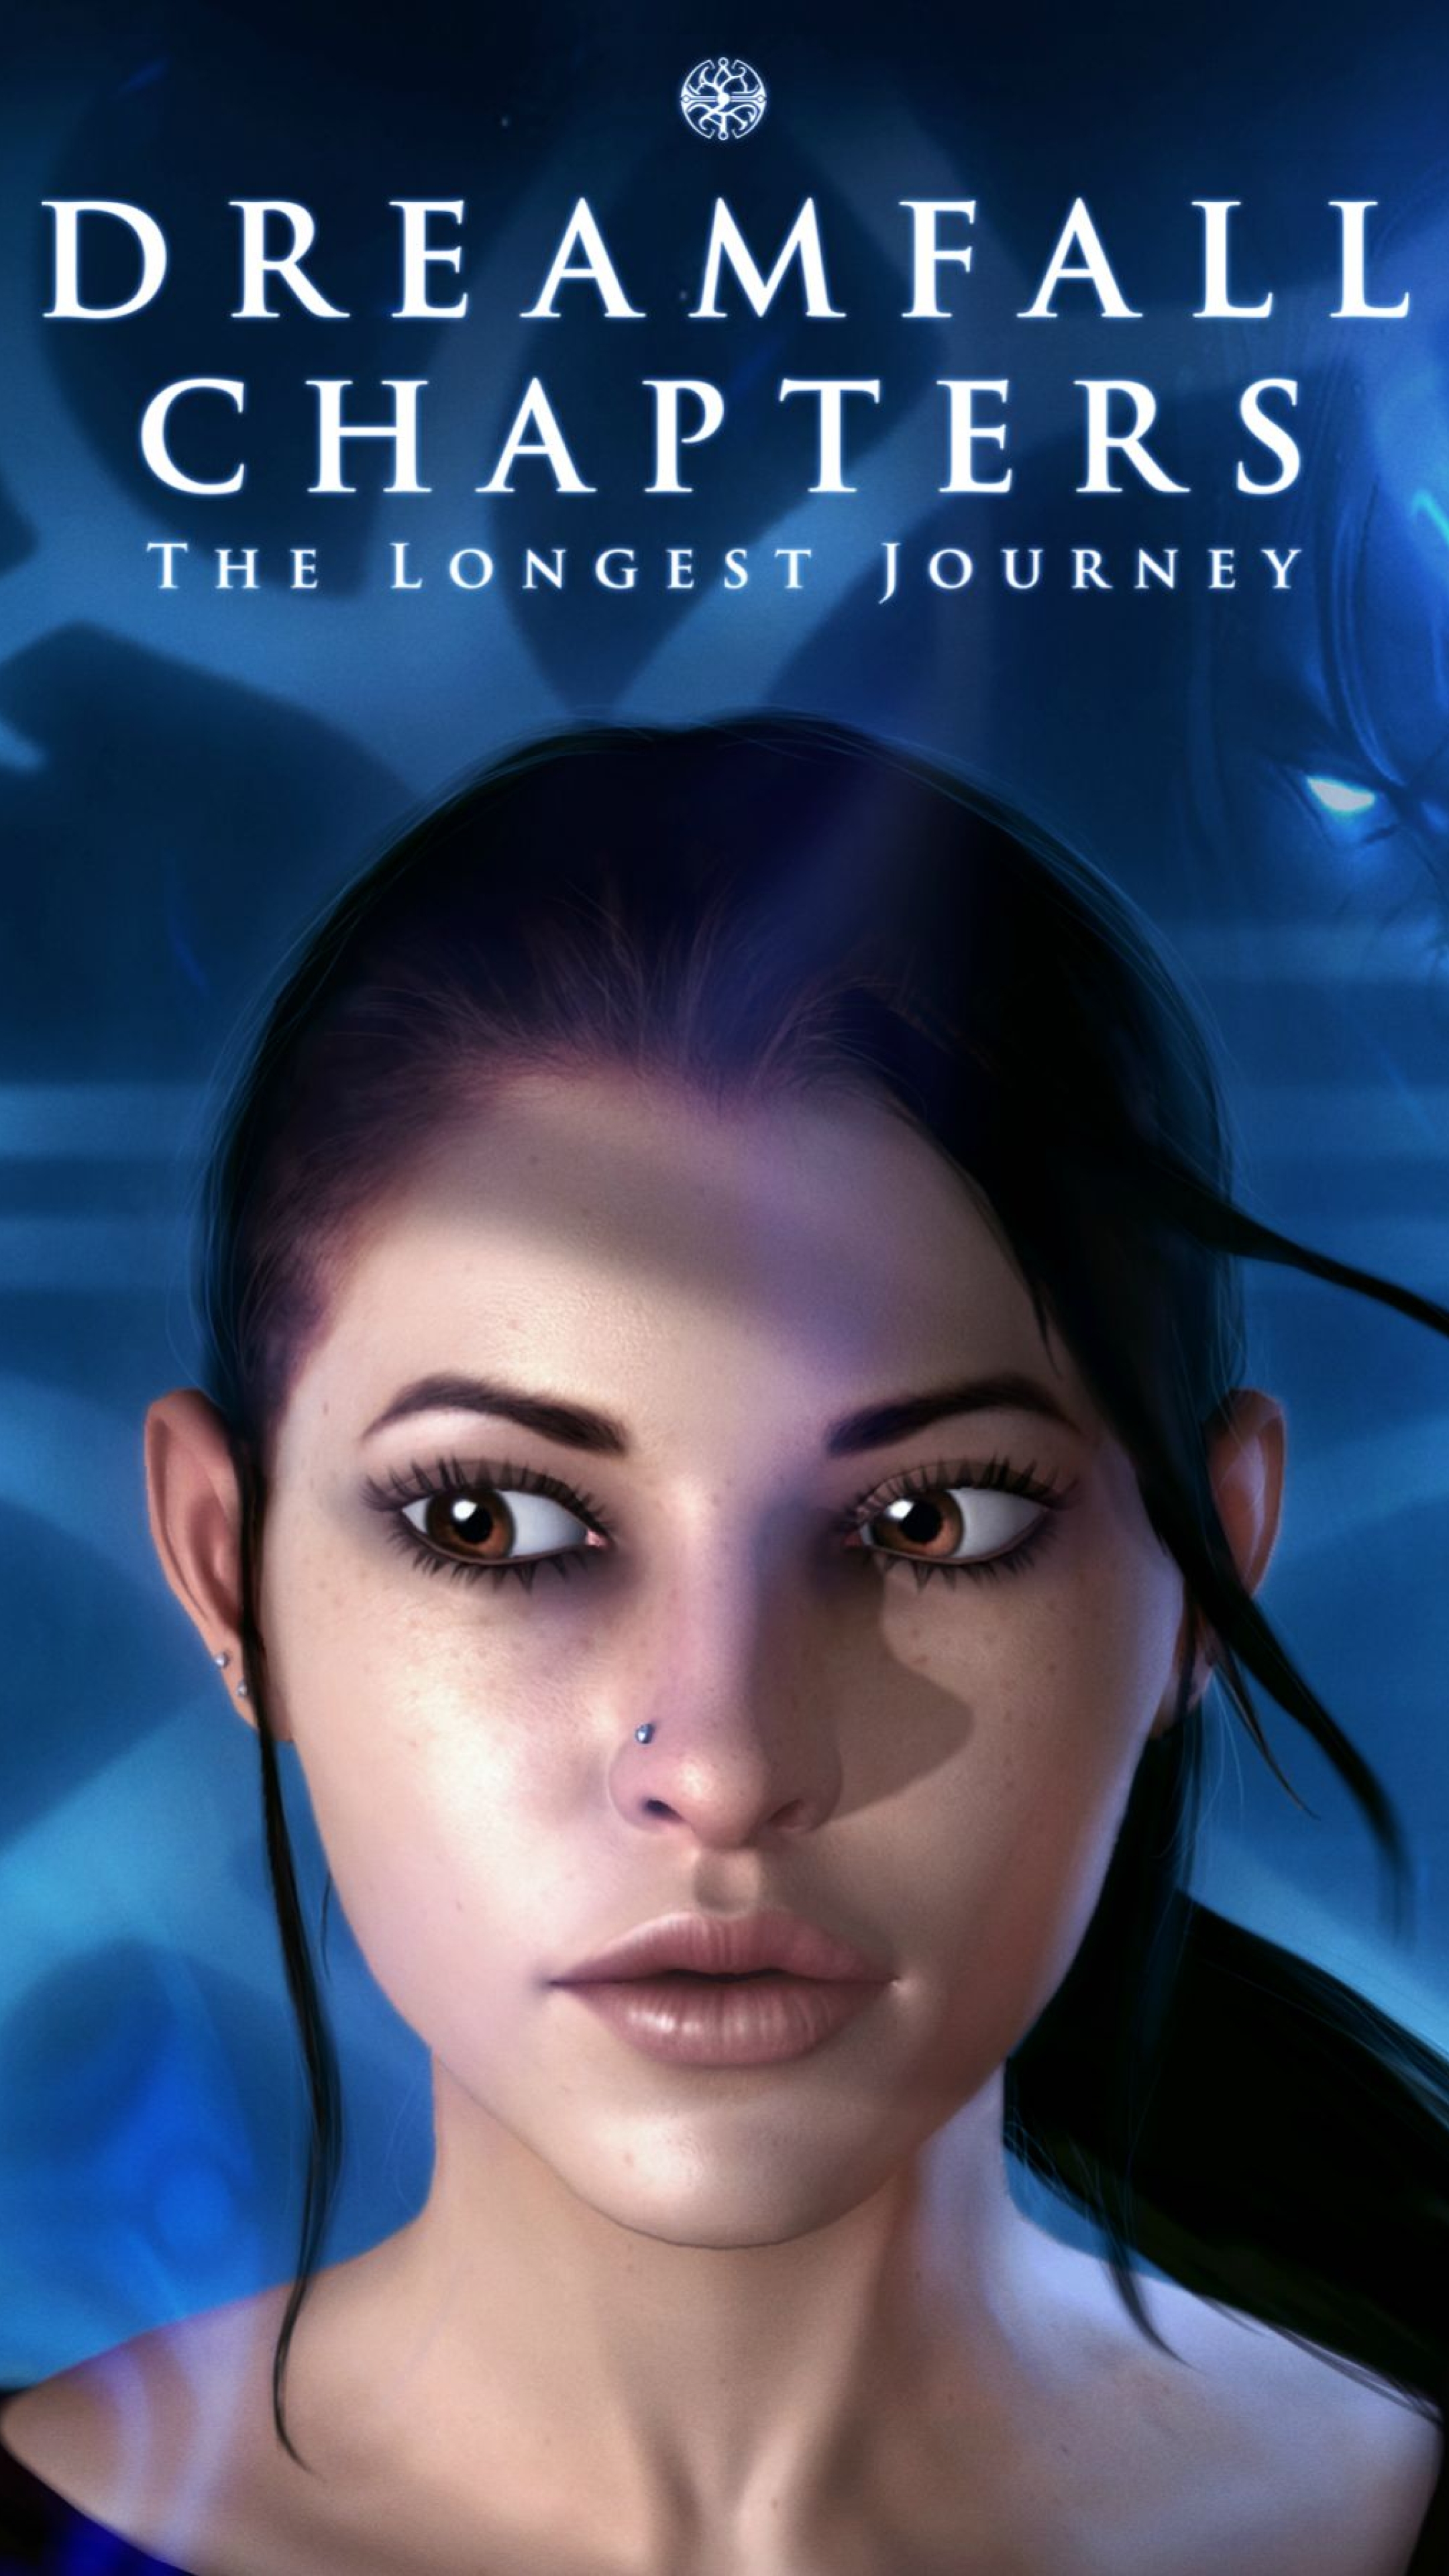 the dreamfall chapters